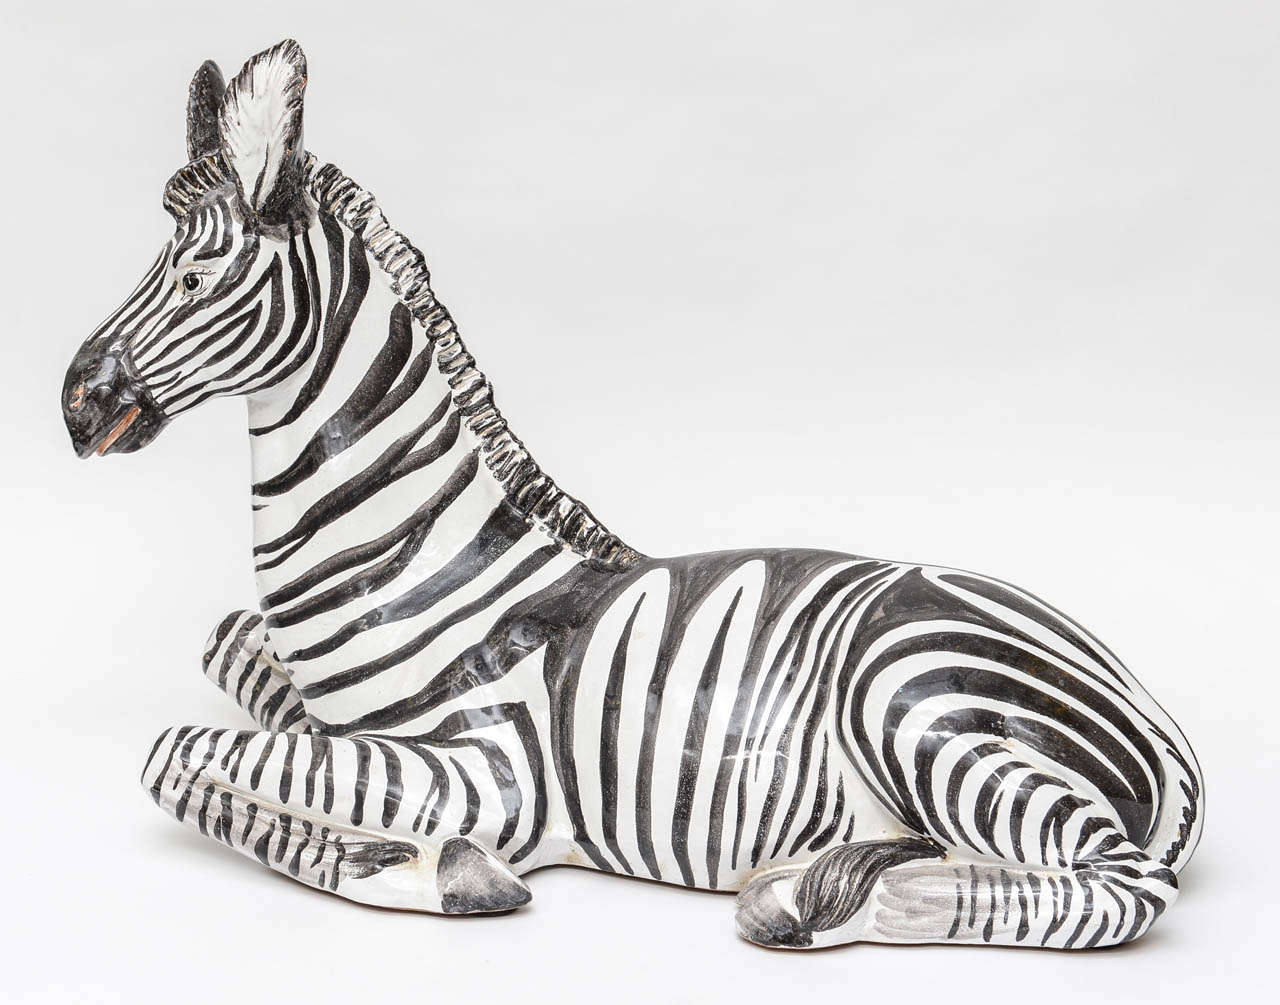 Fabulous Vintage Zebra. Made of Terra Cota and Glazed, from Italy